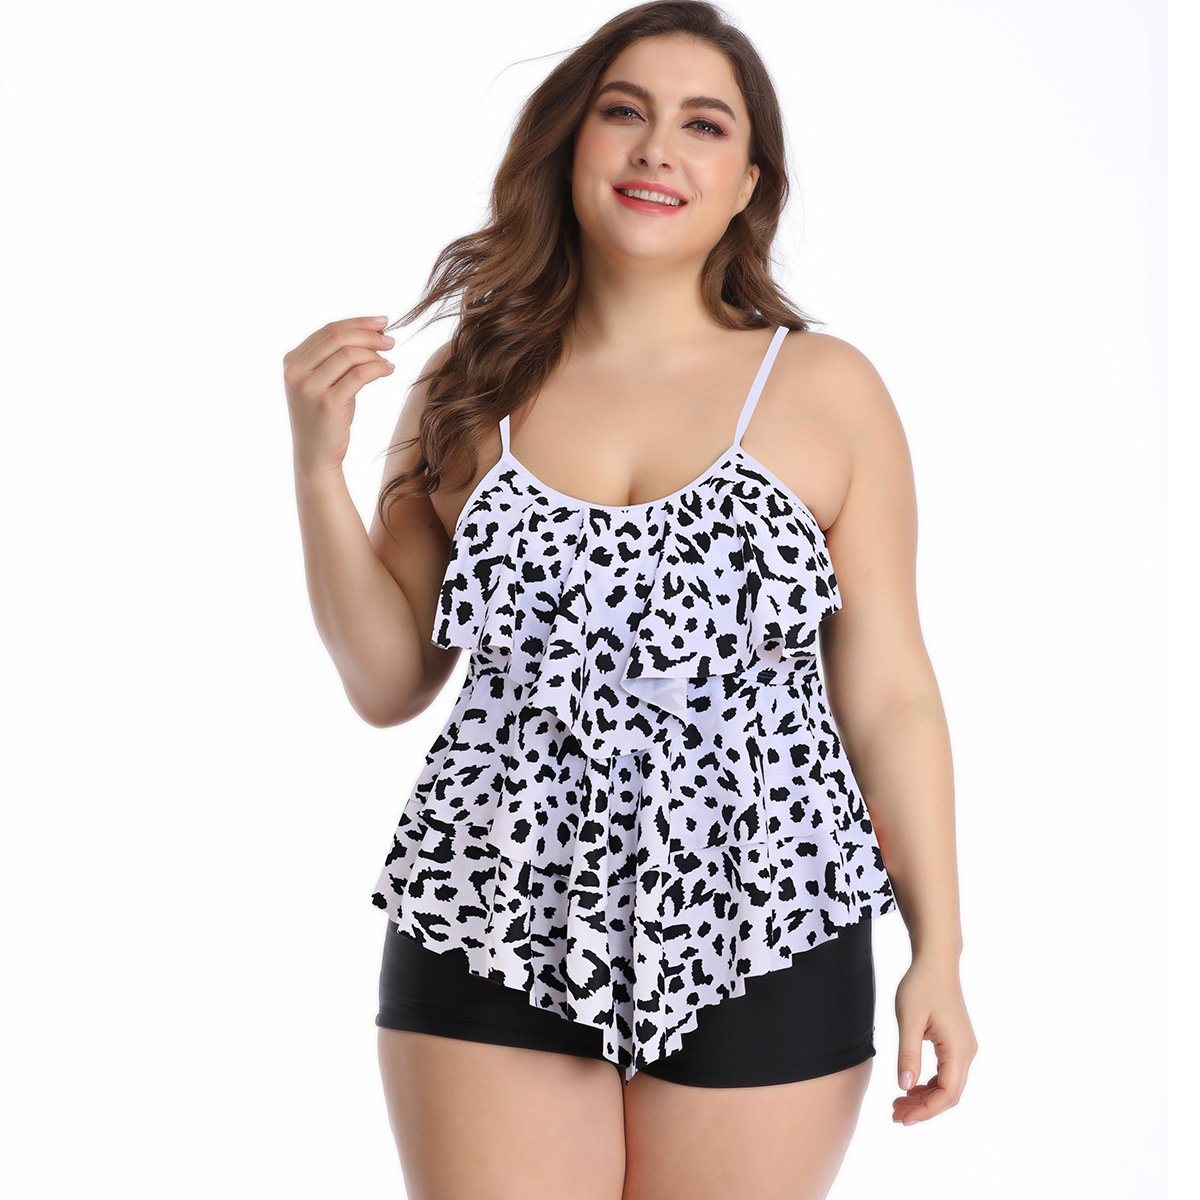 Women Ruffled Floral Print Plus Size Swimsuits-White Leopard-S-Free Shipping at meselling99